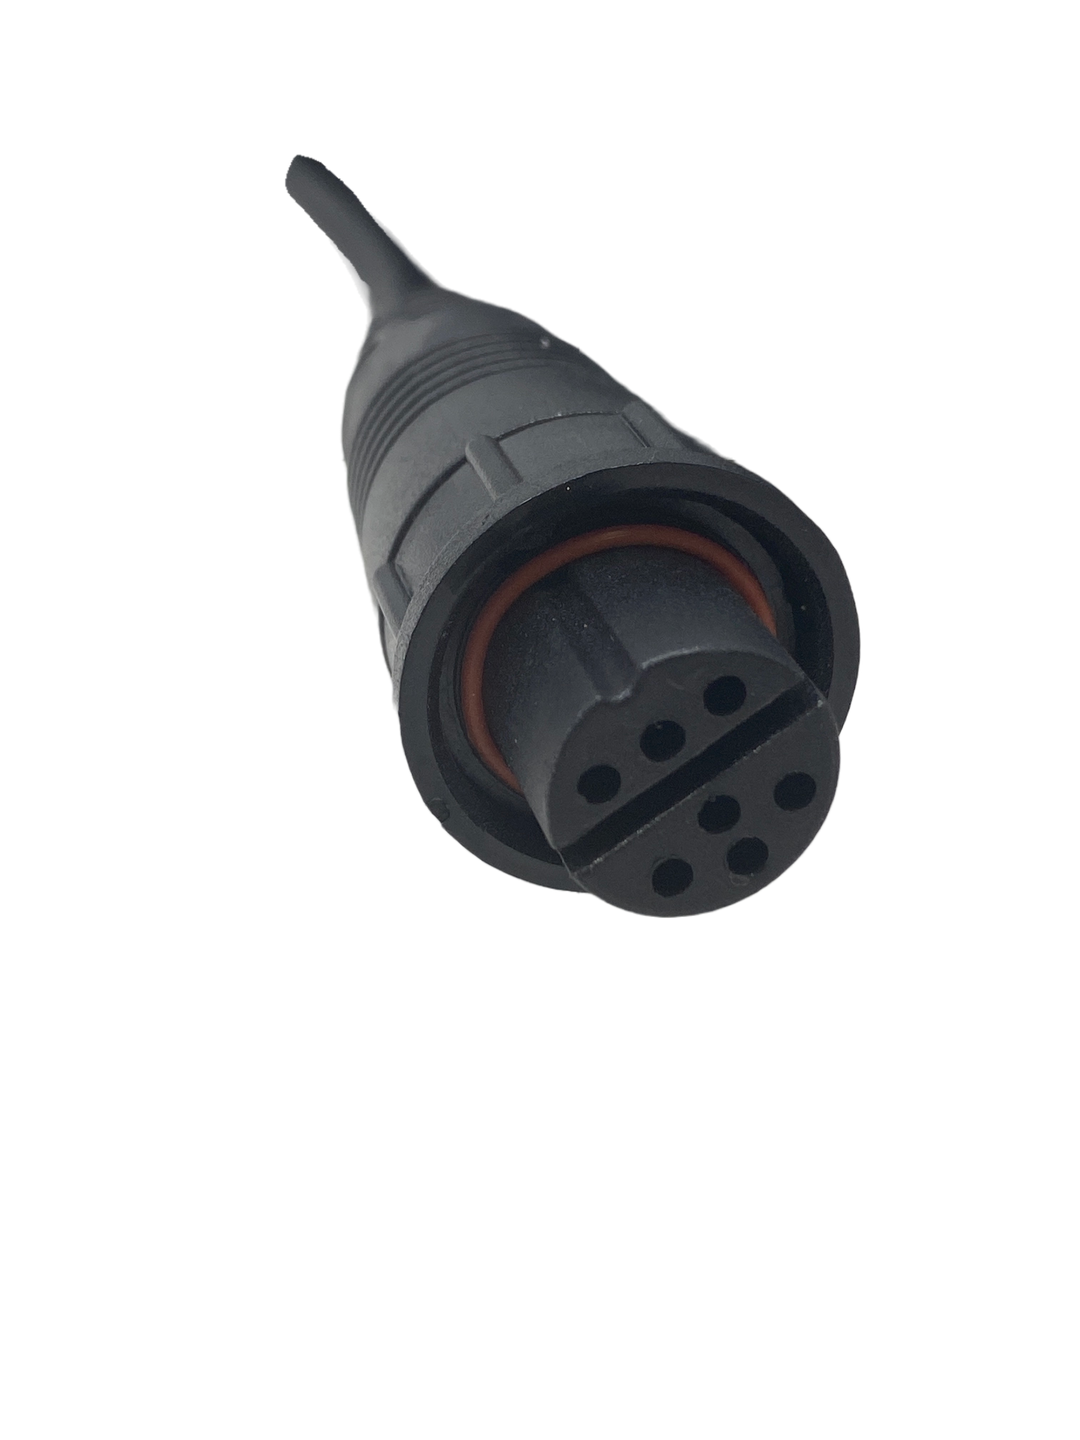 Pentair Communication Cable for Intelliflo Pool Pumps - Closeup of Cable